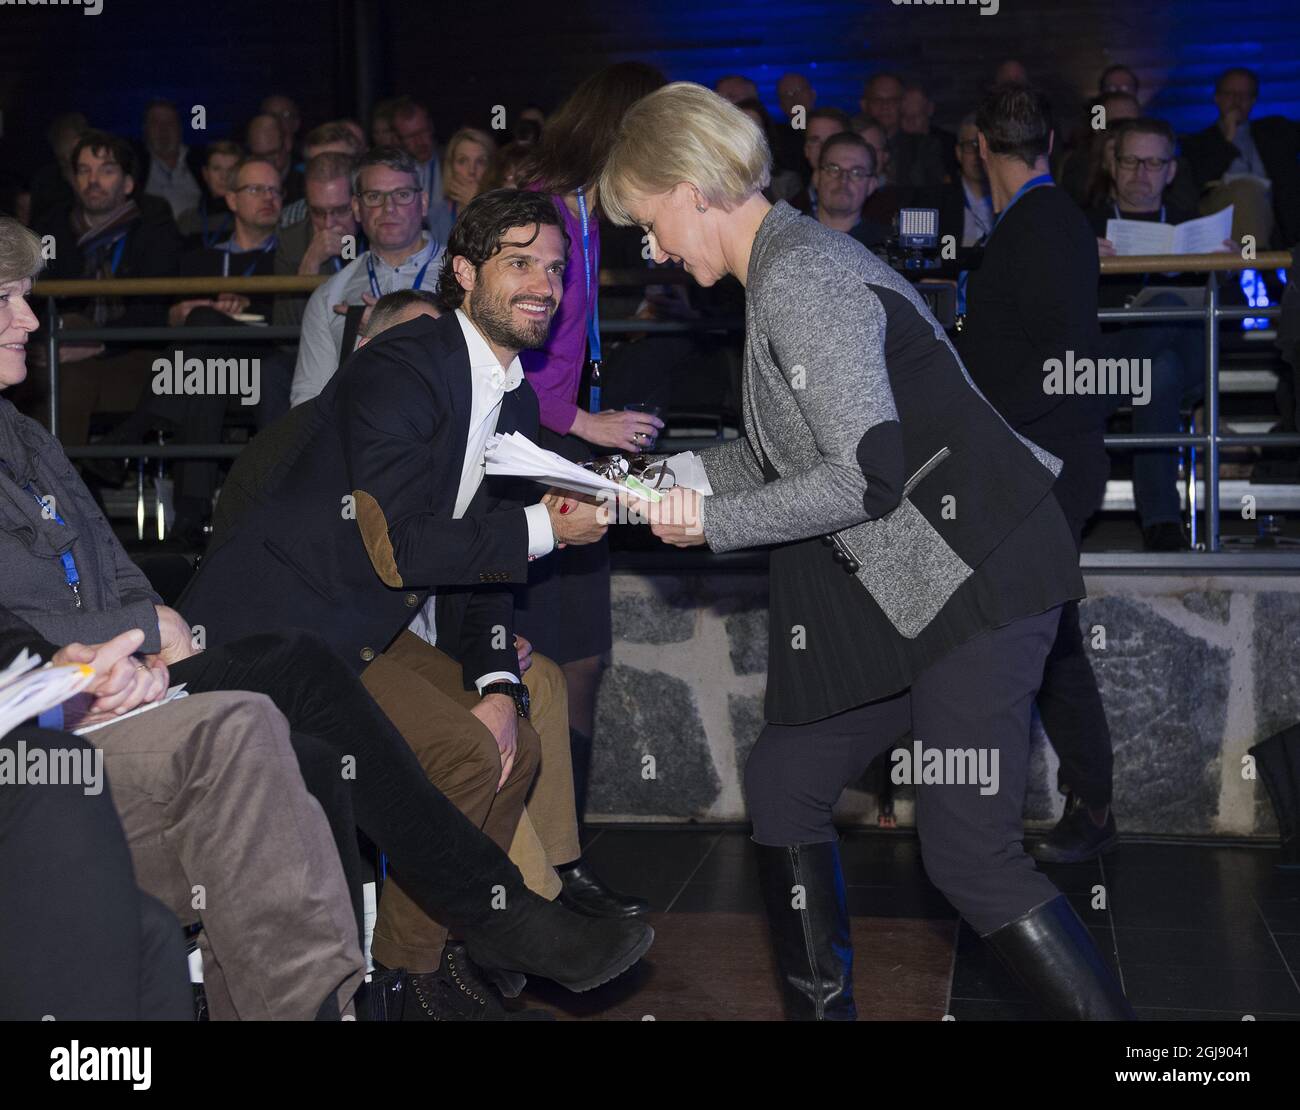 STOCKHOLM 20150111 Prince Carl Philip is seen with Minister for Foreing affairs Margit Wallstrom during at the annual Defense Conference in Salen, Sweden, January 12, 2015 Foto: Sven Lindwall / EXP / TT / kod 7117 ** OUT SWEDEN OUT **  Stock Photo